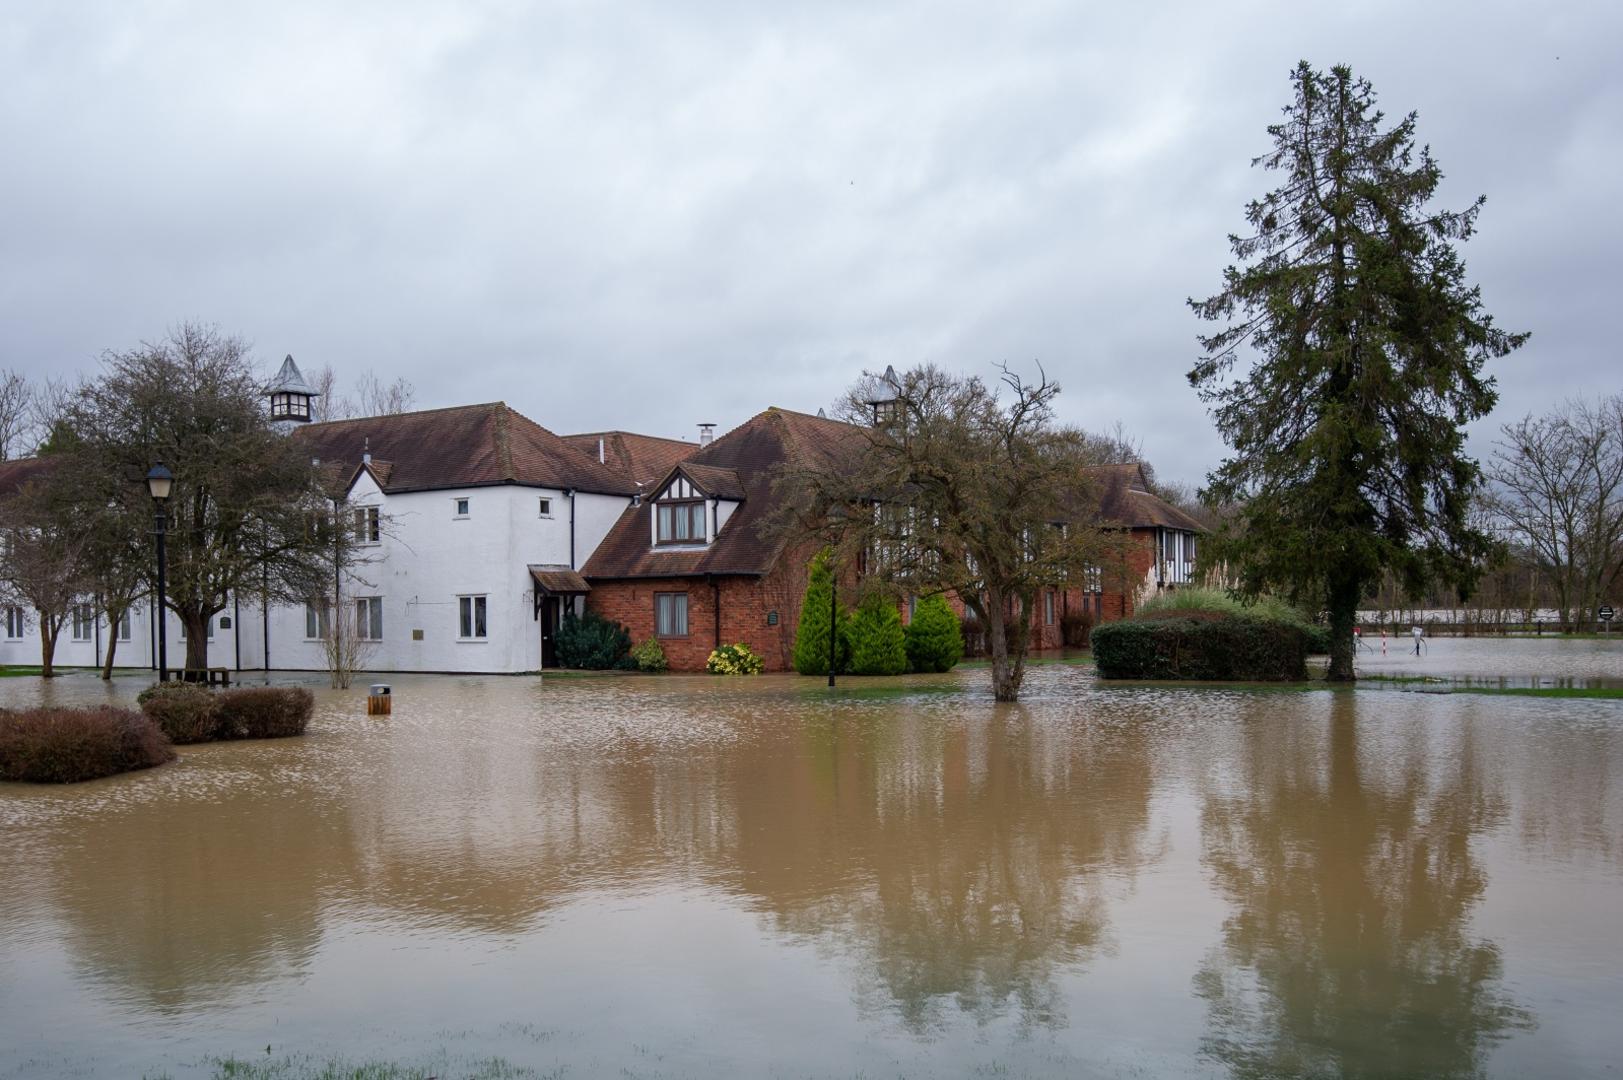 Winter weather Dec 26th 2020 Flood water surrounds The Barn Hotel in Bedford, after residents living near the River Great Ouse in north Bedfordshire were "strongly urged" to seek alternative accommodation due to fears of flooding. Joe Giddens  Photo: PA Images/PIXSELL